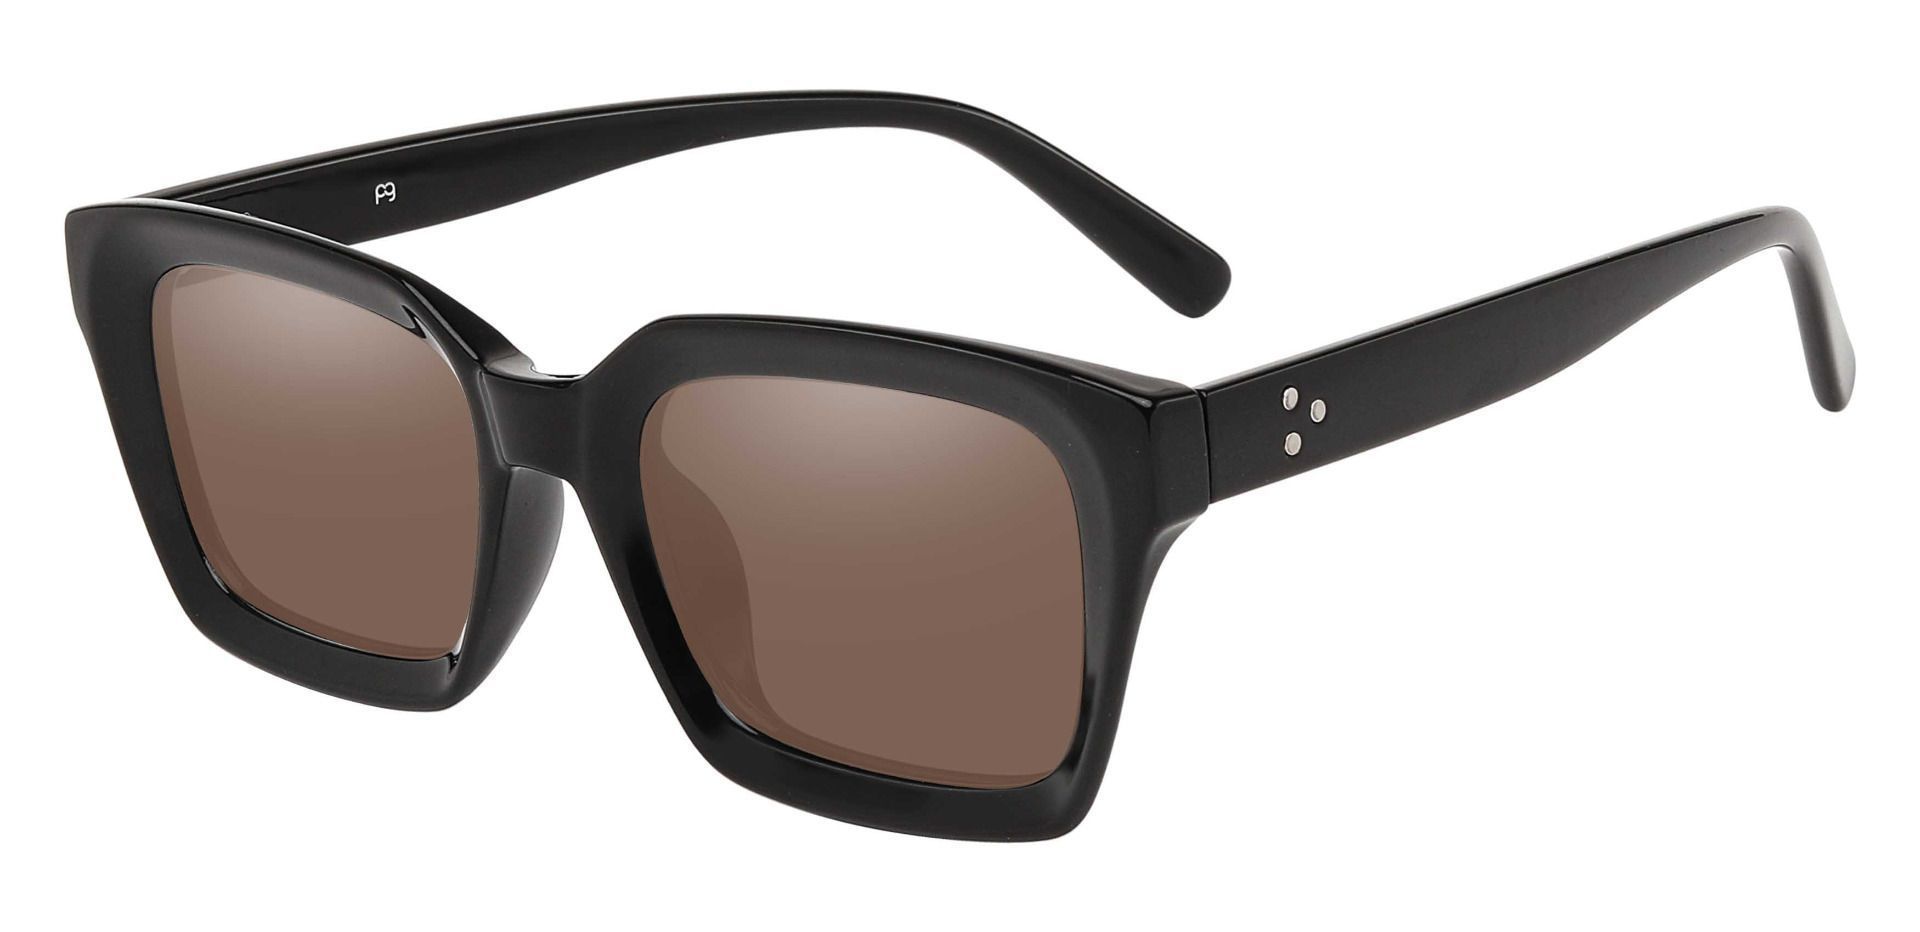 Unity Rectangle Non-Rx Sunglasses - Black Frame With Brown Lenses